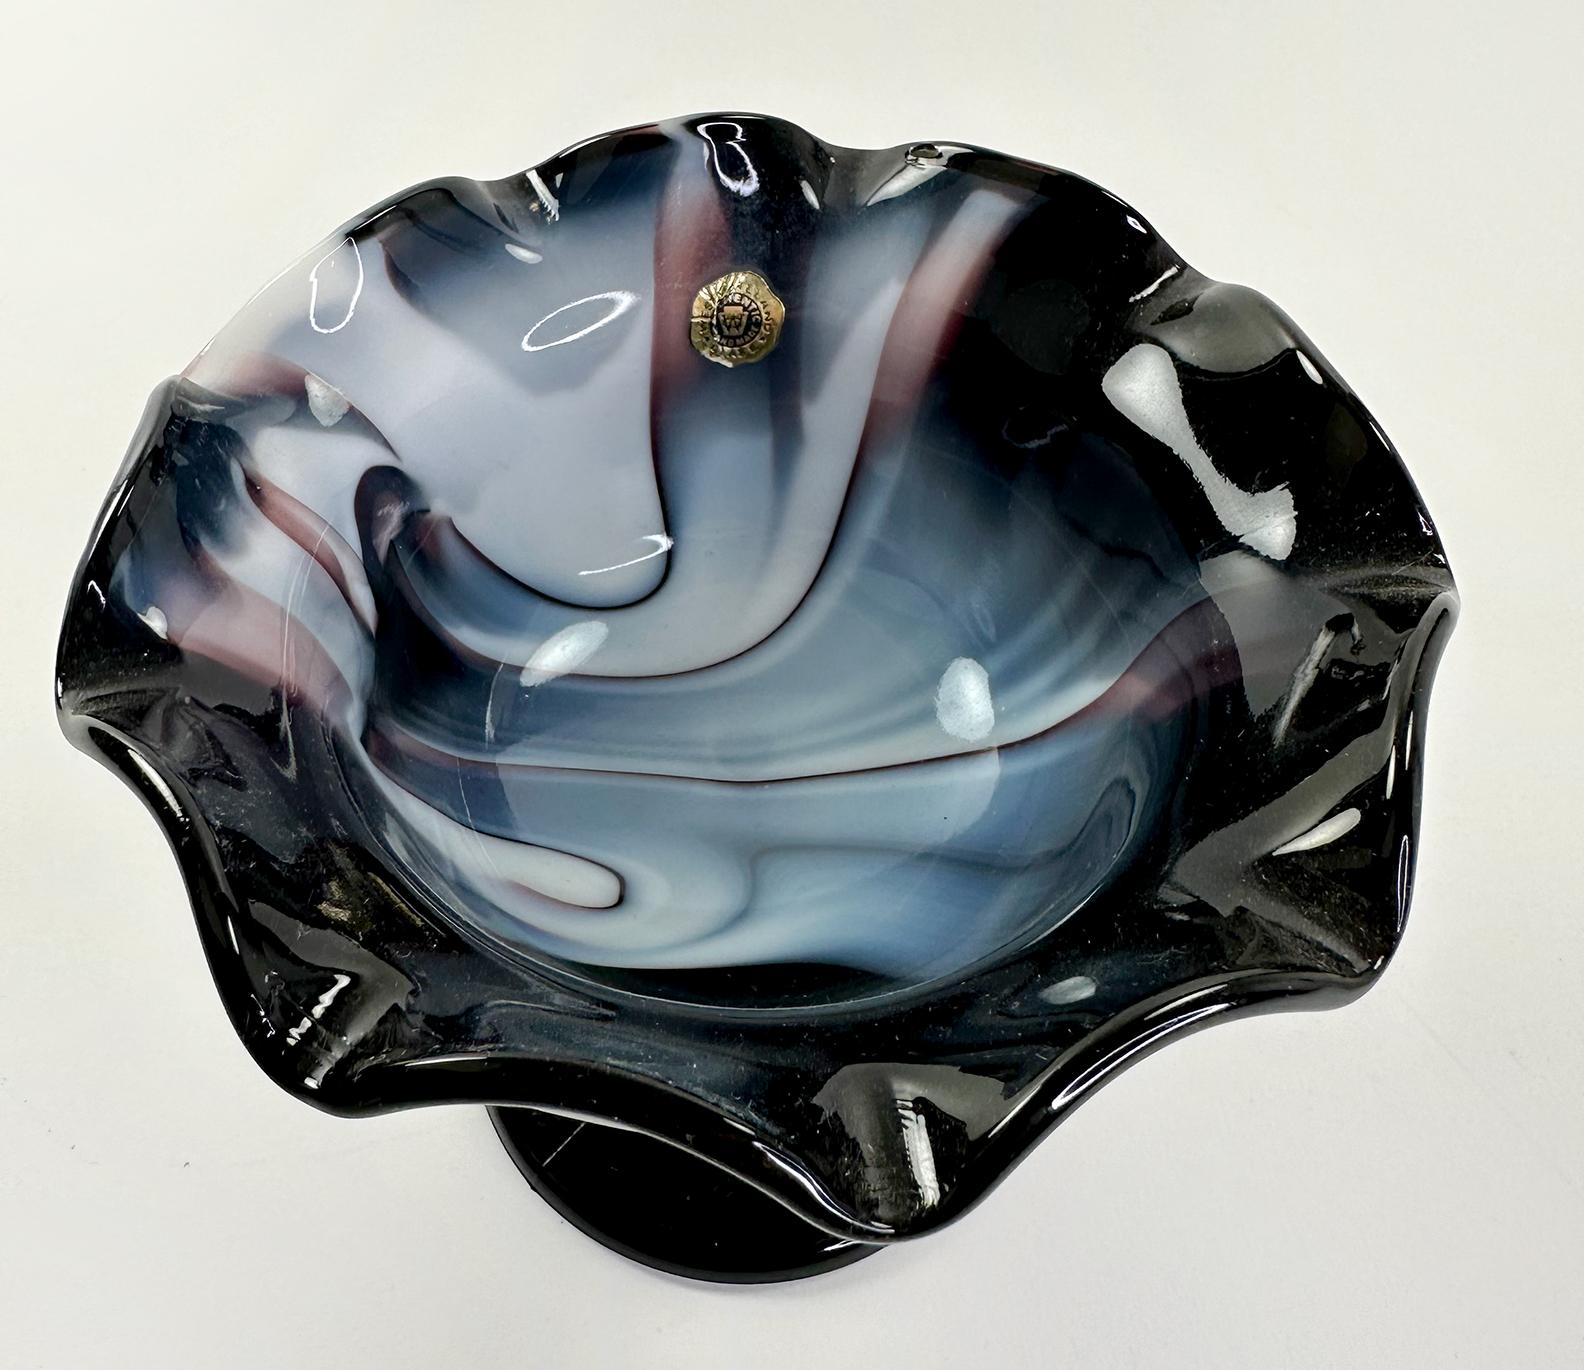 A charming petite black ruffled vintage art deco Westmoreland art slag glass purple and white dish bowl. Hand blown glass with marbleized coloring with white, black/dark purple with some ochre accents. 

In excellent condition. Would make a great